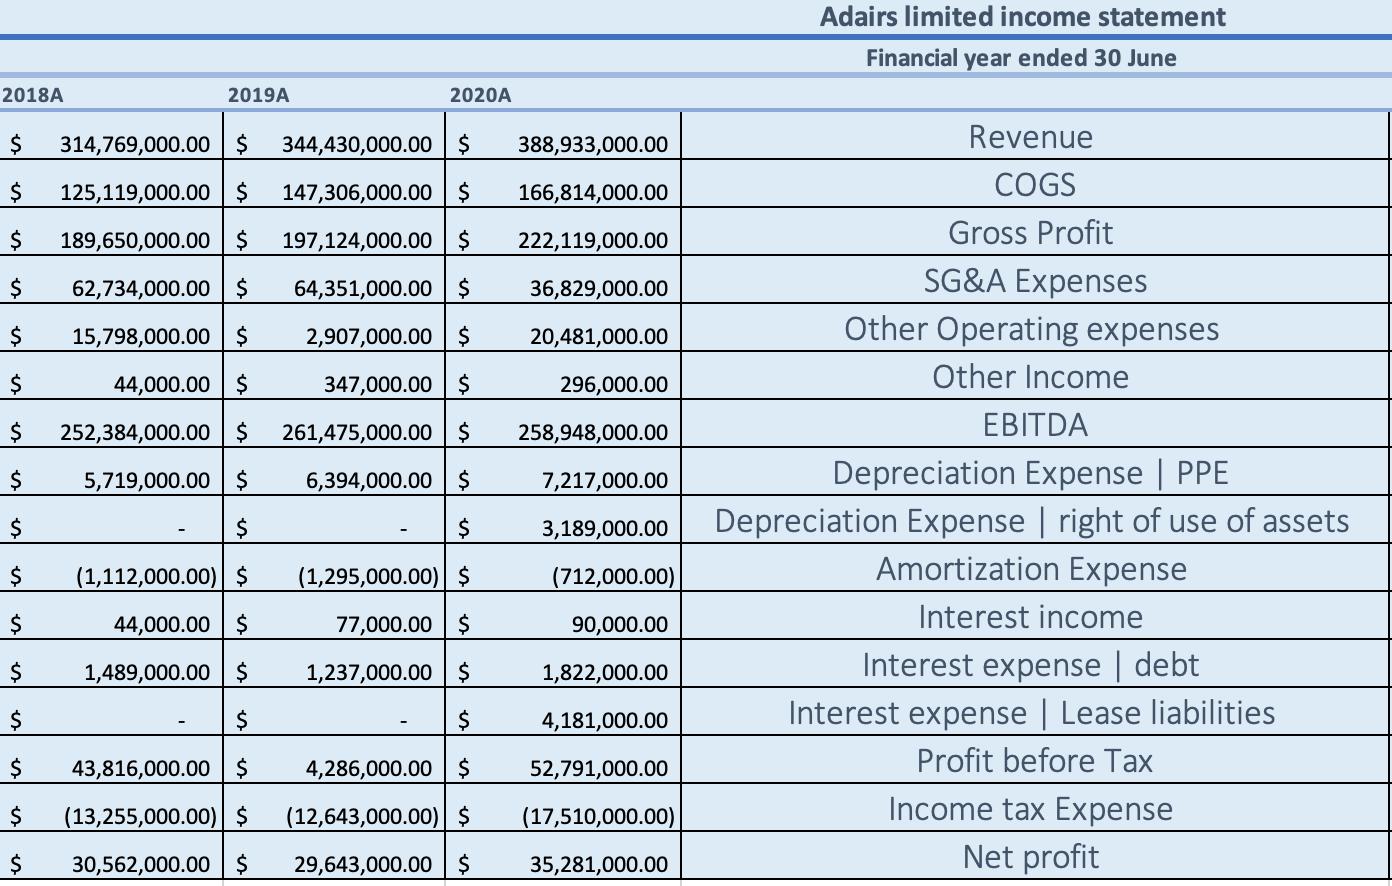 Adairs limited income statement Financial year ended 30 June 2018A 2019A 2020A $ 314,769,000.00 $ 344,430,000.00 $ 388,933,00